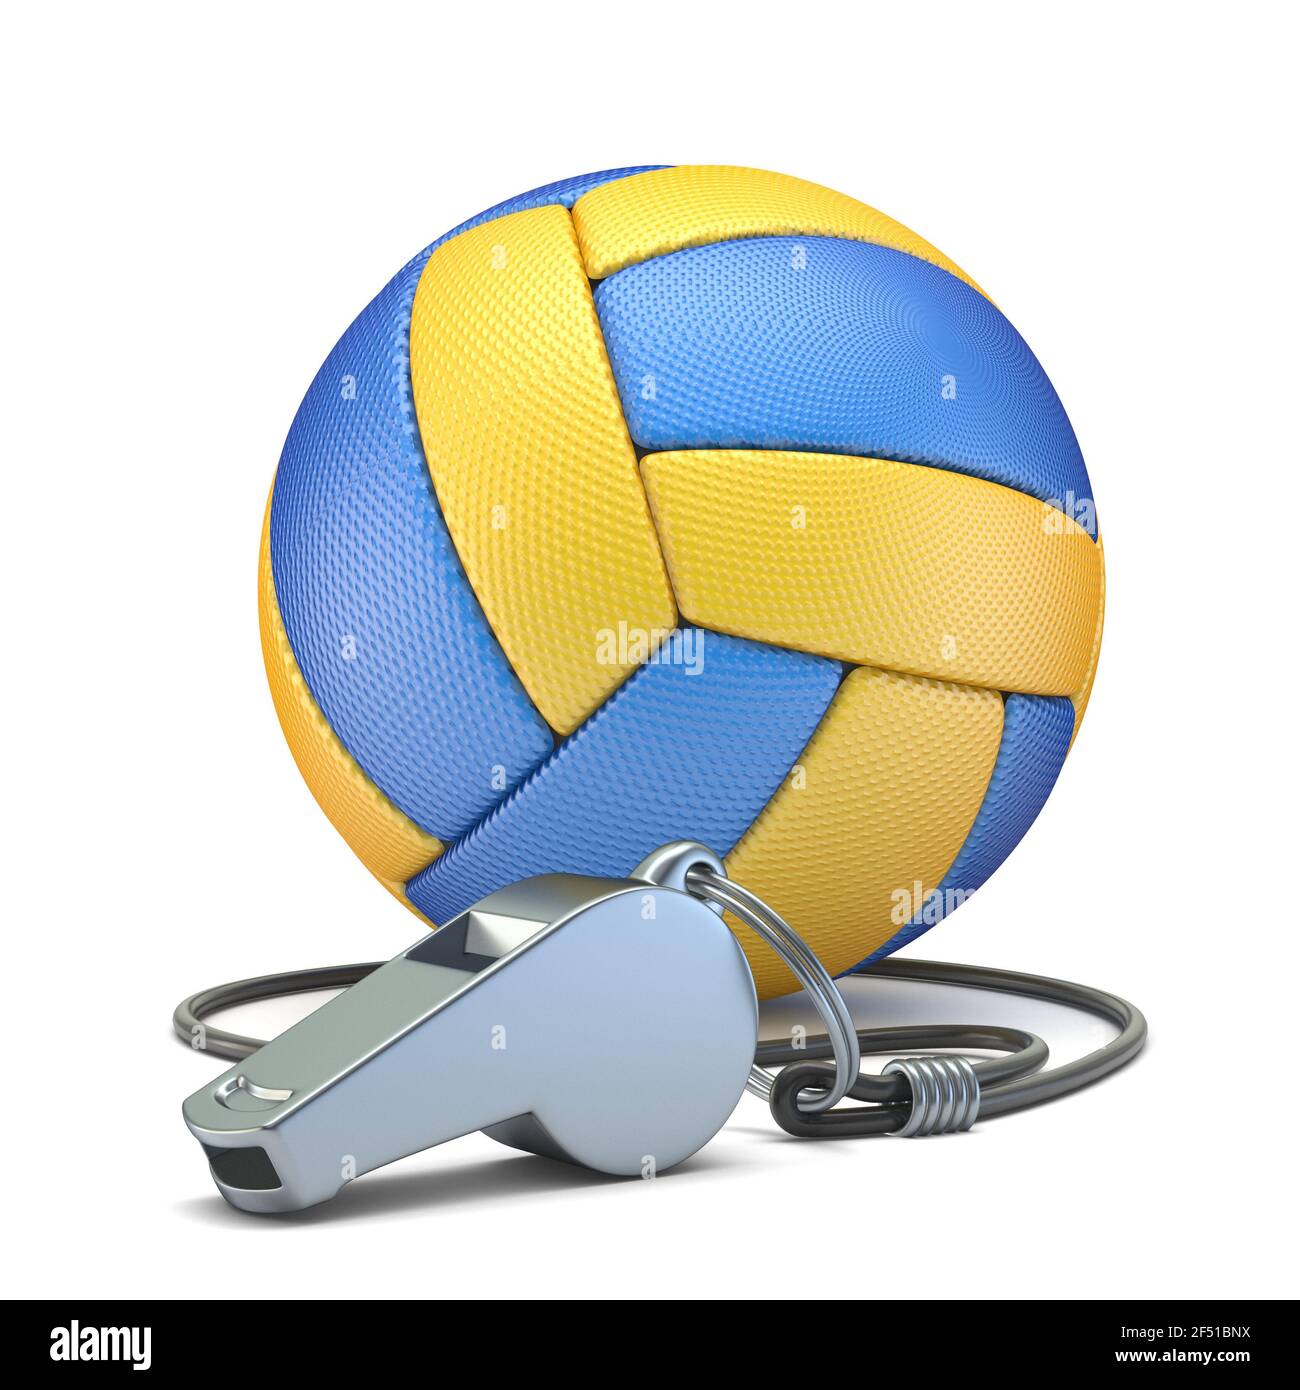 Volleyball ball with metal whistle 3D render illustration isolated on white background Stock Photo